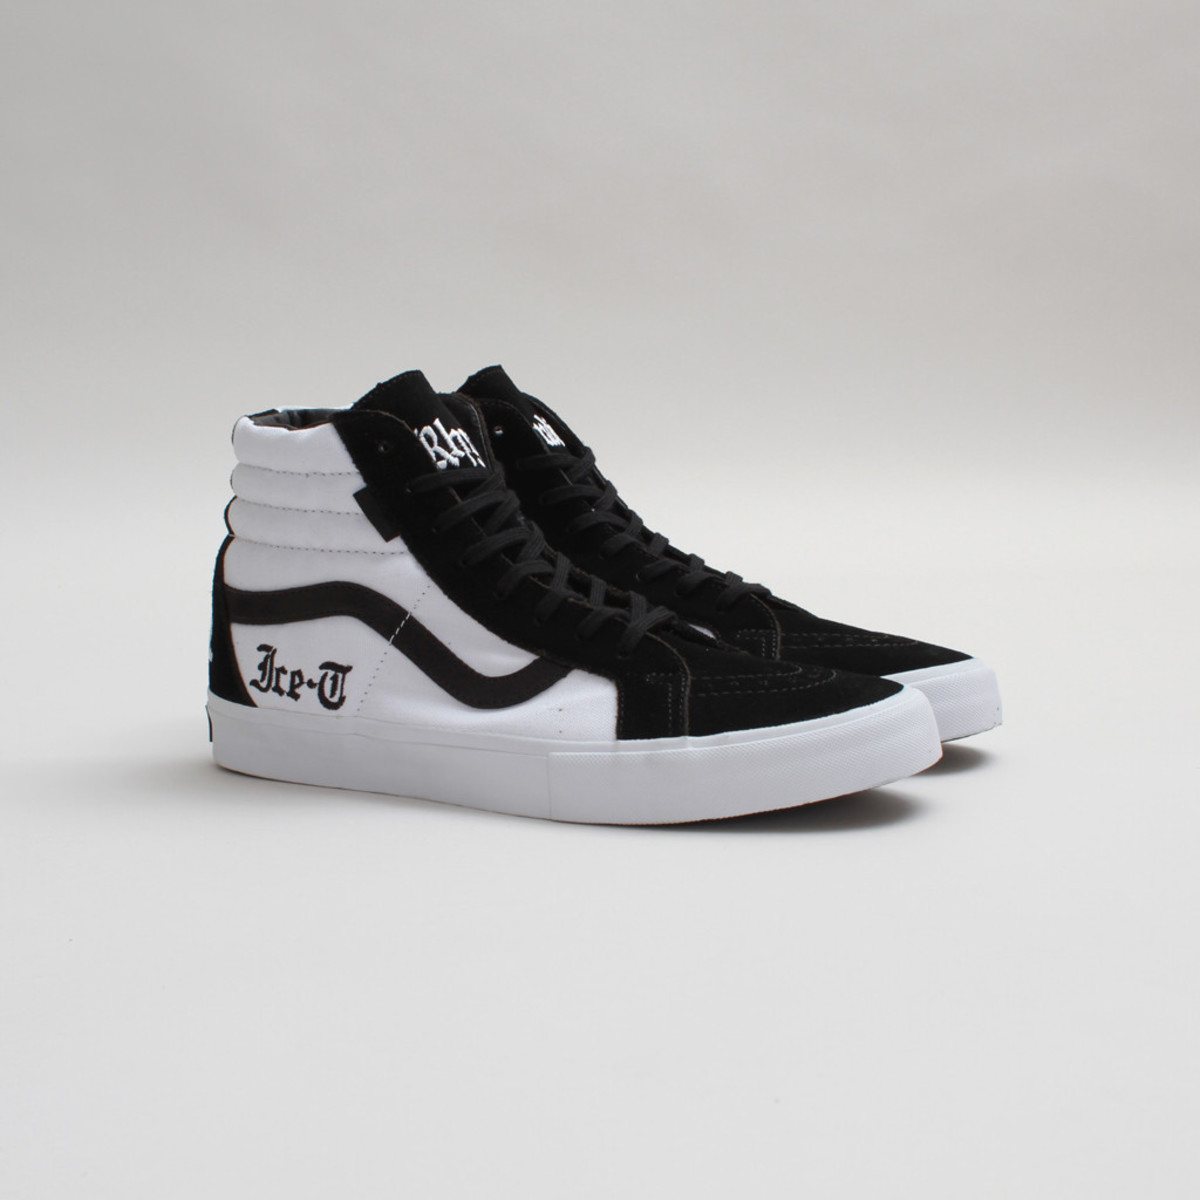 Kicks of the Day: Ice-T x Vans Syndicate Sk8-Hi “Rhyme Syndicate” | Complex